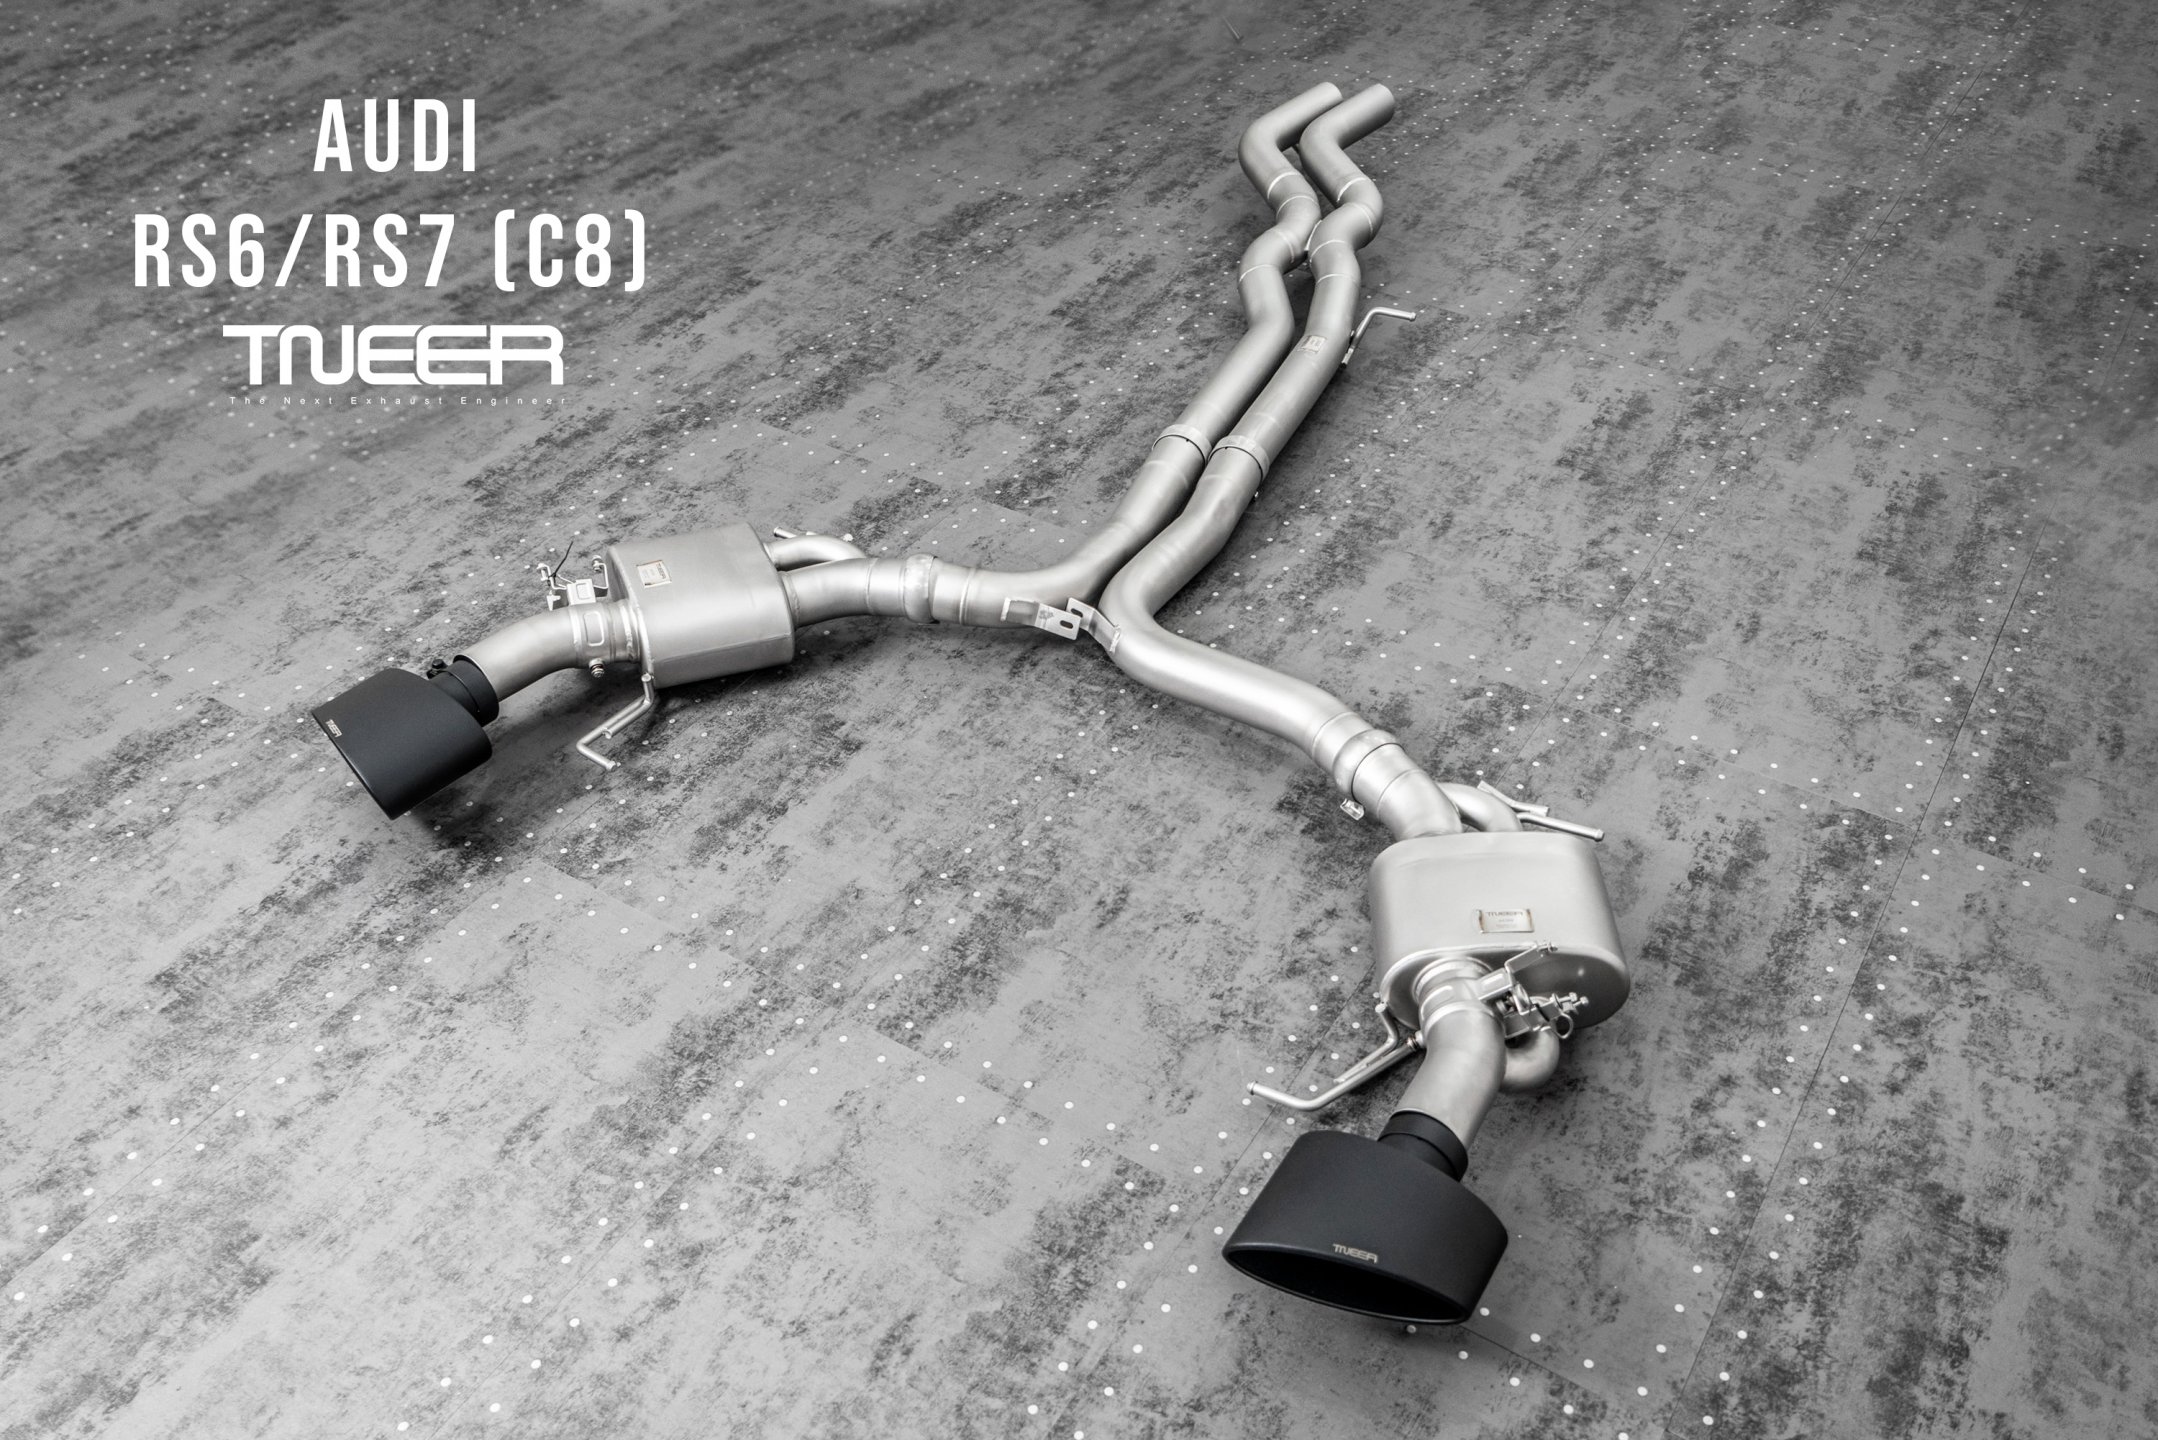 Audi RS7 (C8) 4.0 TFSI V8 TNEER Exhaust System with Dual Silver Tips